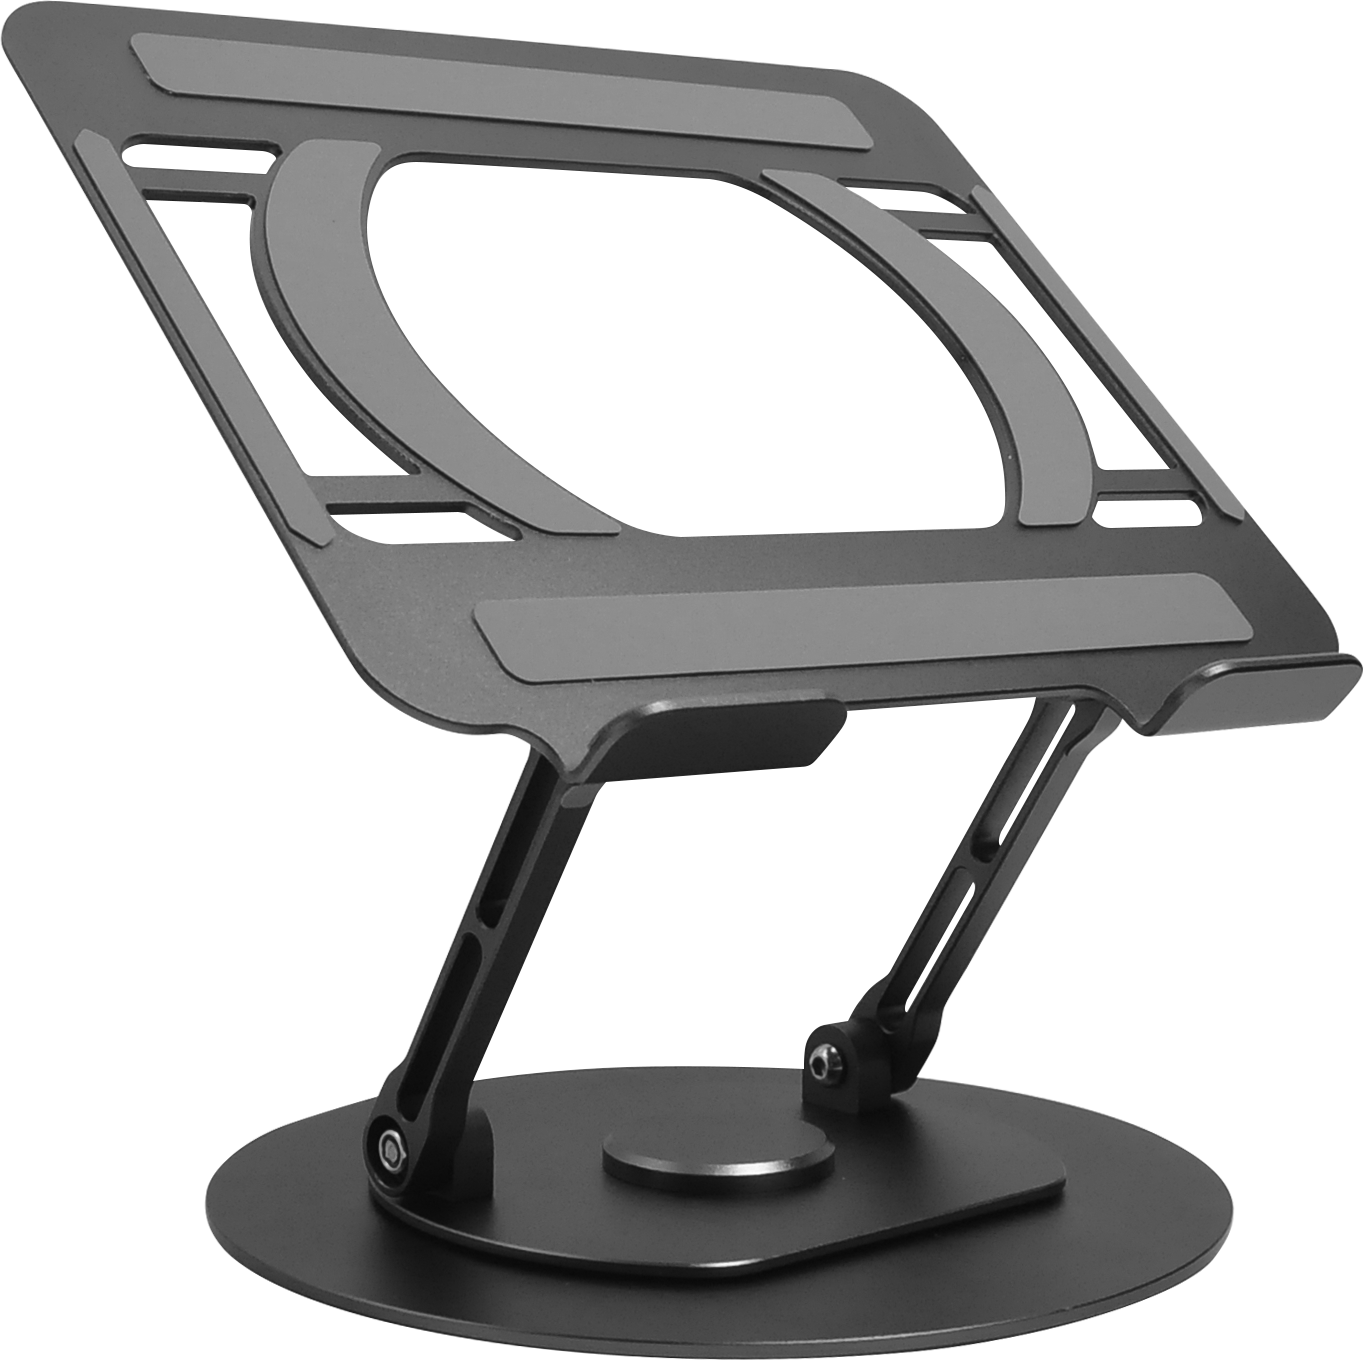 Vision introduces new laptop stands to channel